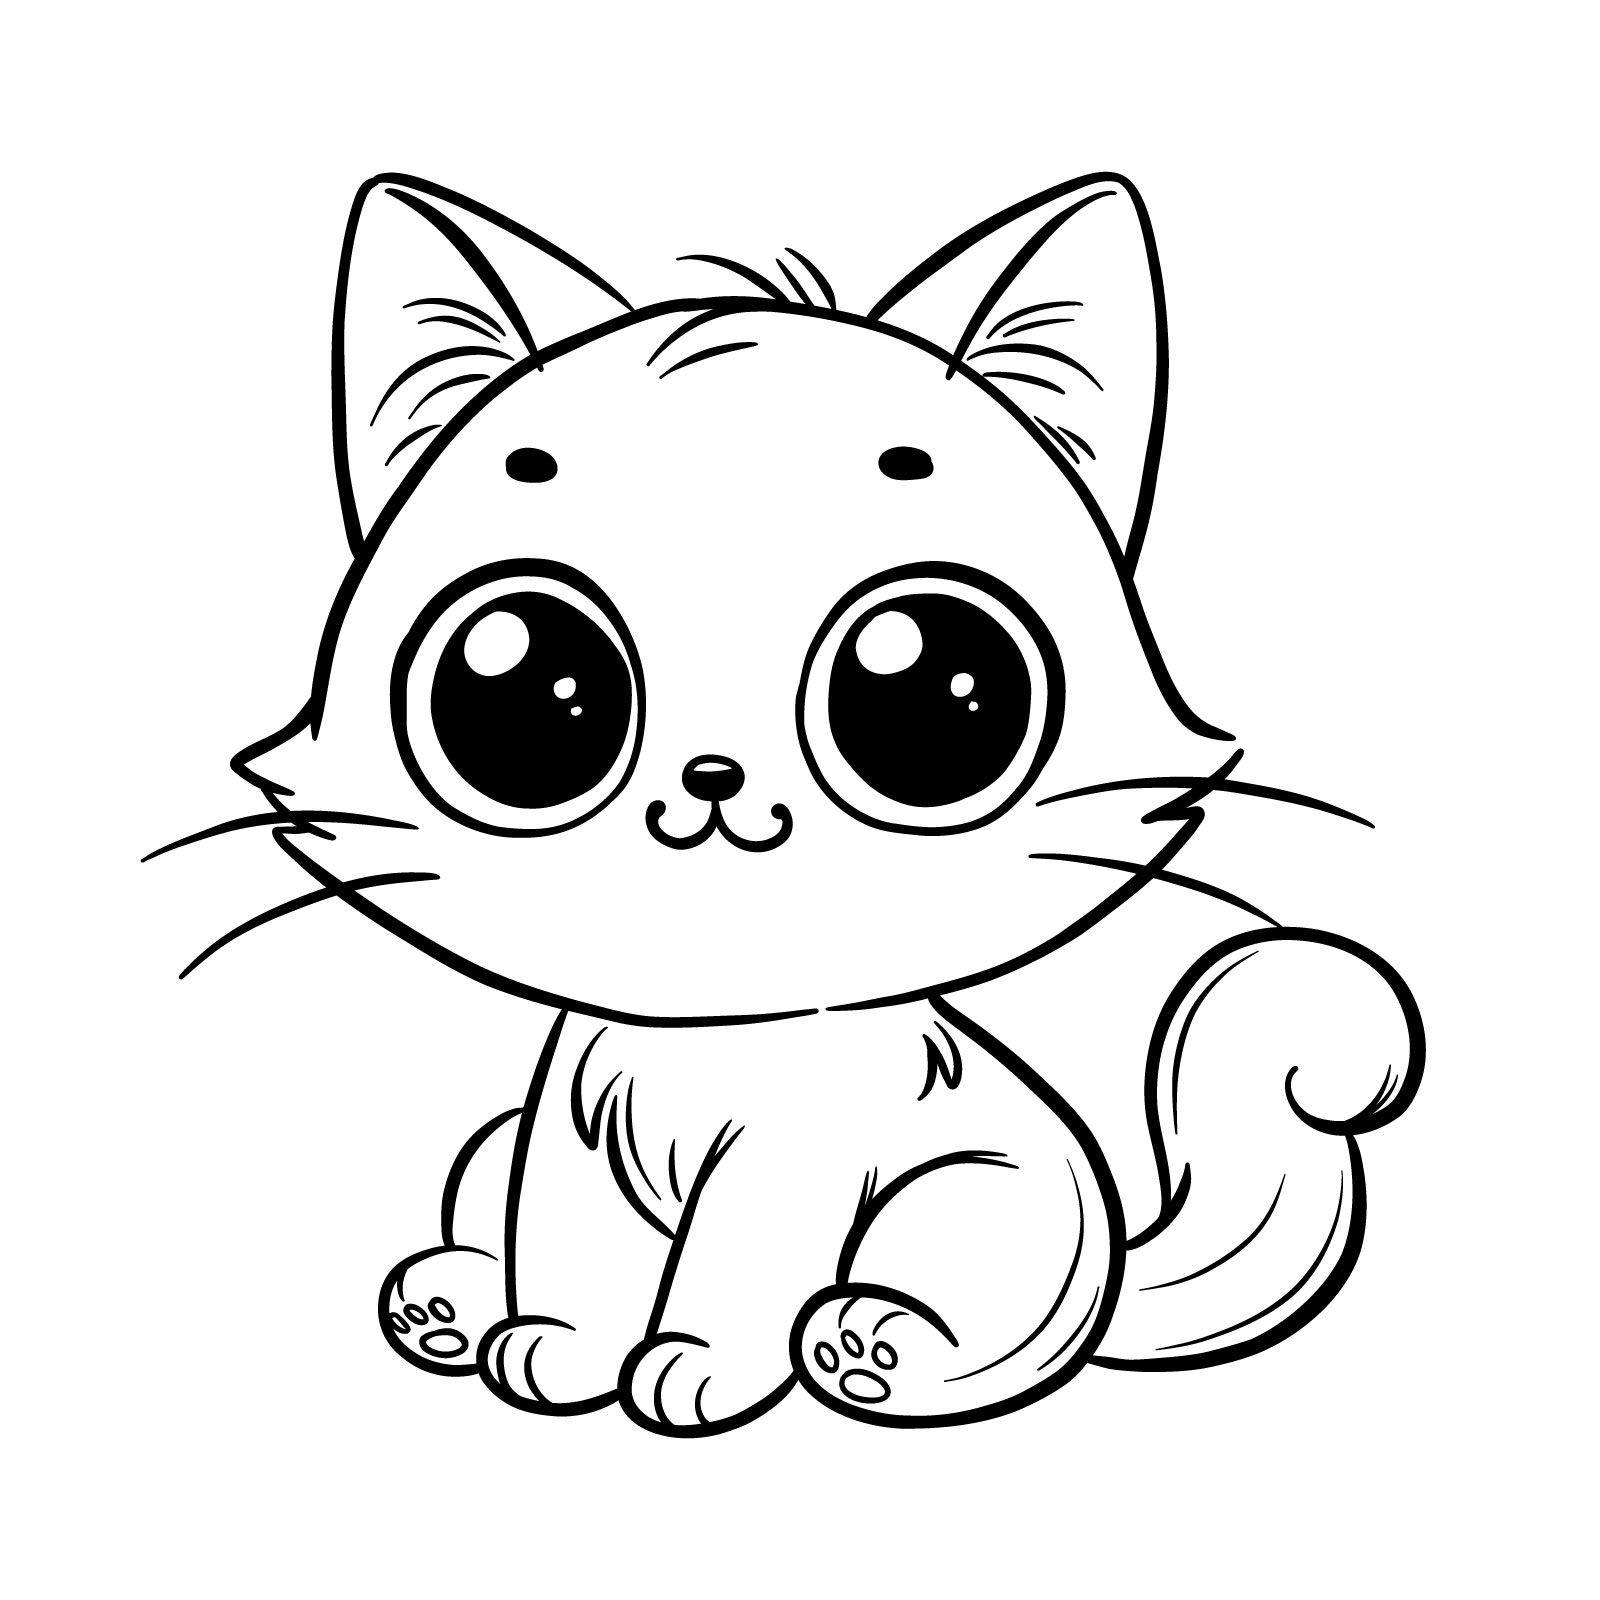 Detailed Cartoon Kitten Sitting - Easy Drawing Guide - step 12